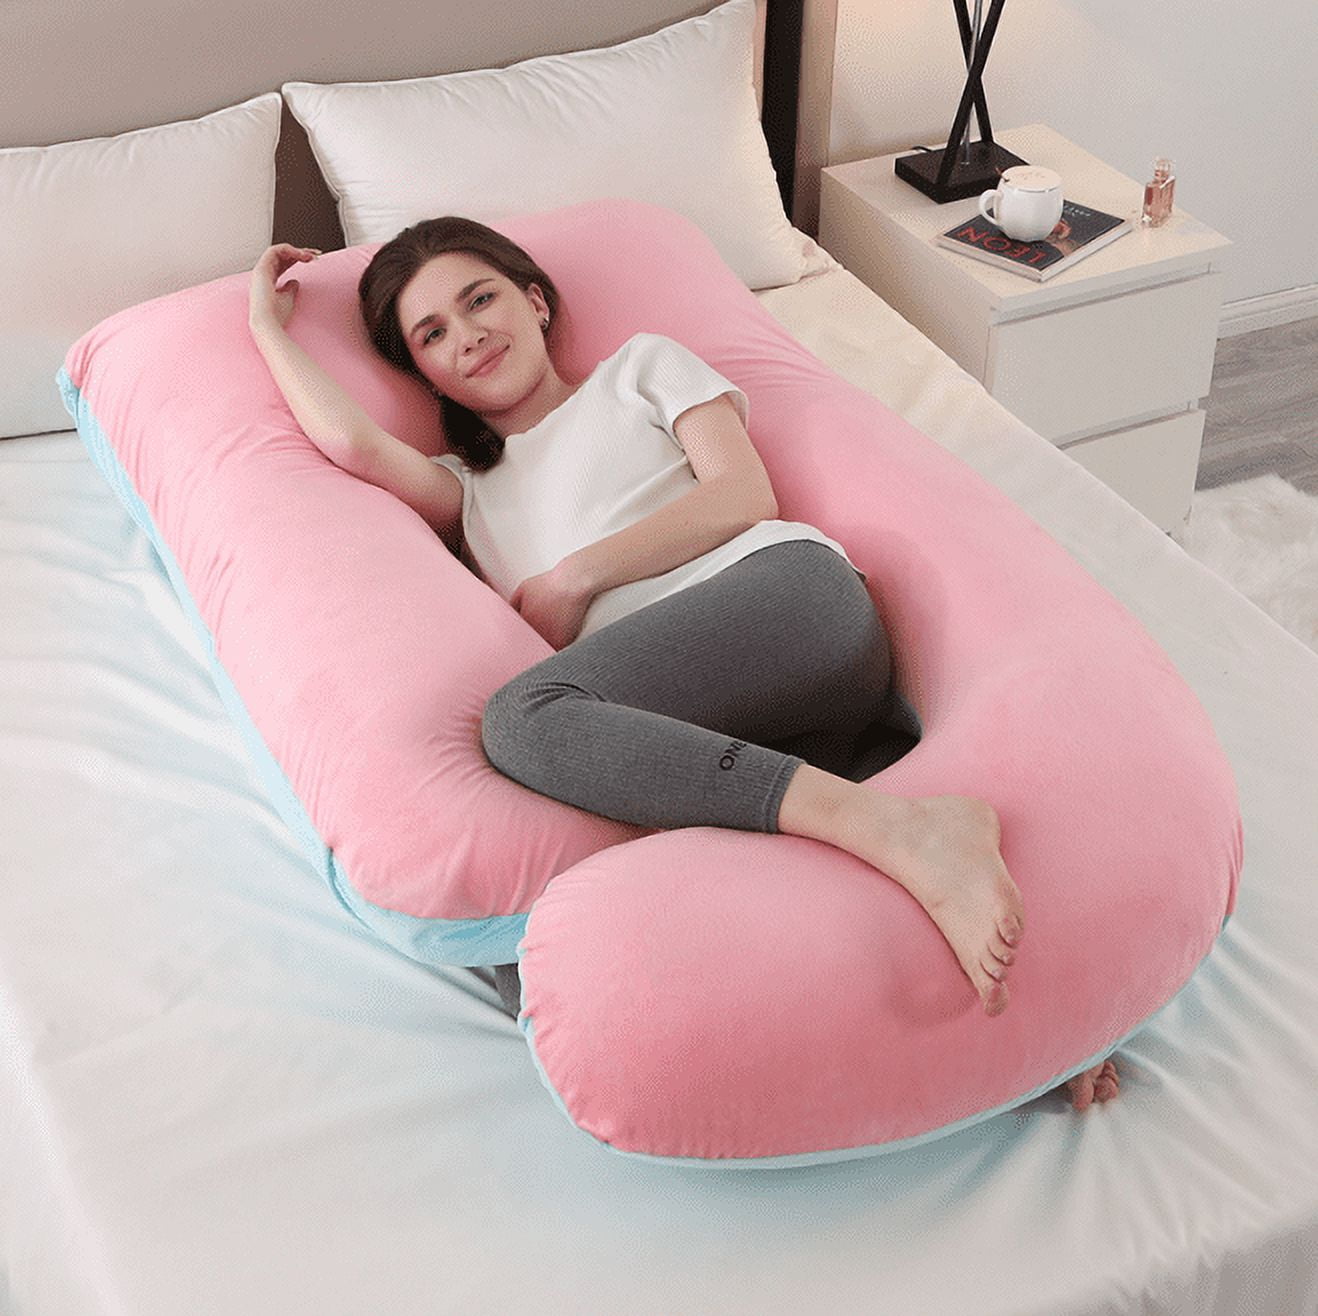 57 Inches Pregnancy Pillow, U Shaped Maternity Full Body Pillow for Women  With Hip, Leg, Back Pain, Washable Jersey Cover Included 